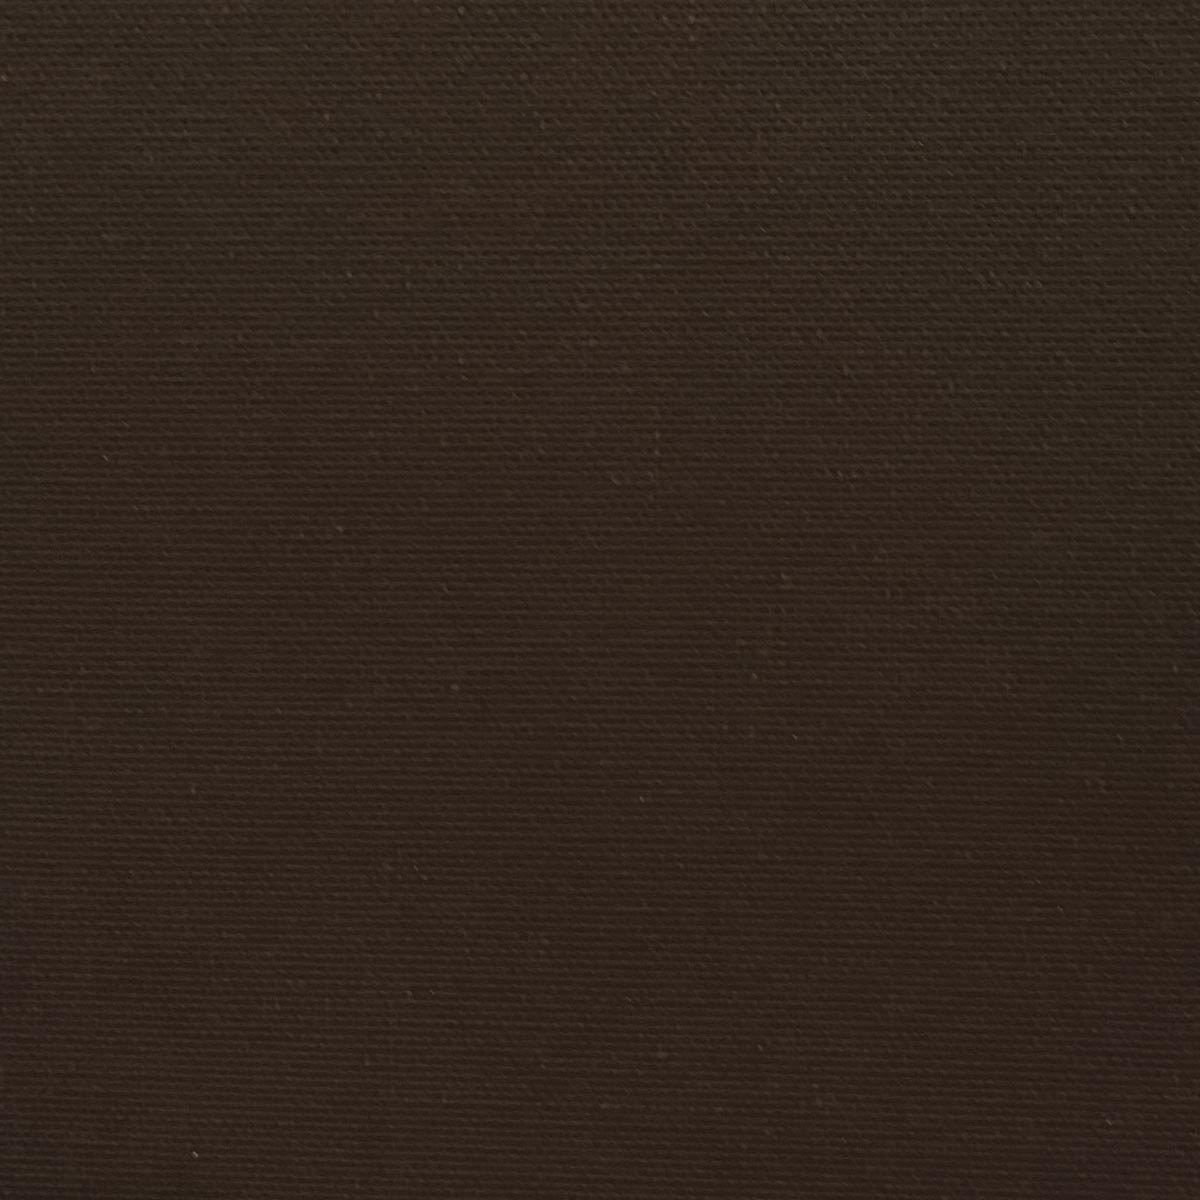 Persiana Enrollable Black Out Night Fall 1.00 X 2.30 Cocoa Classic